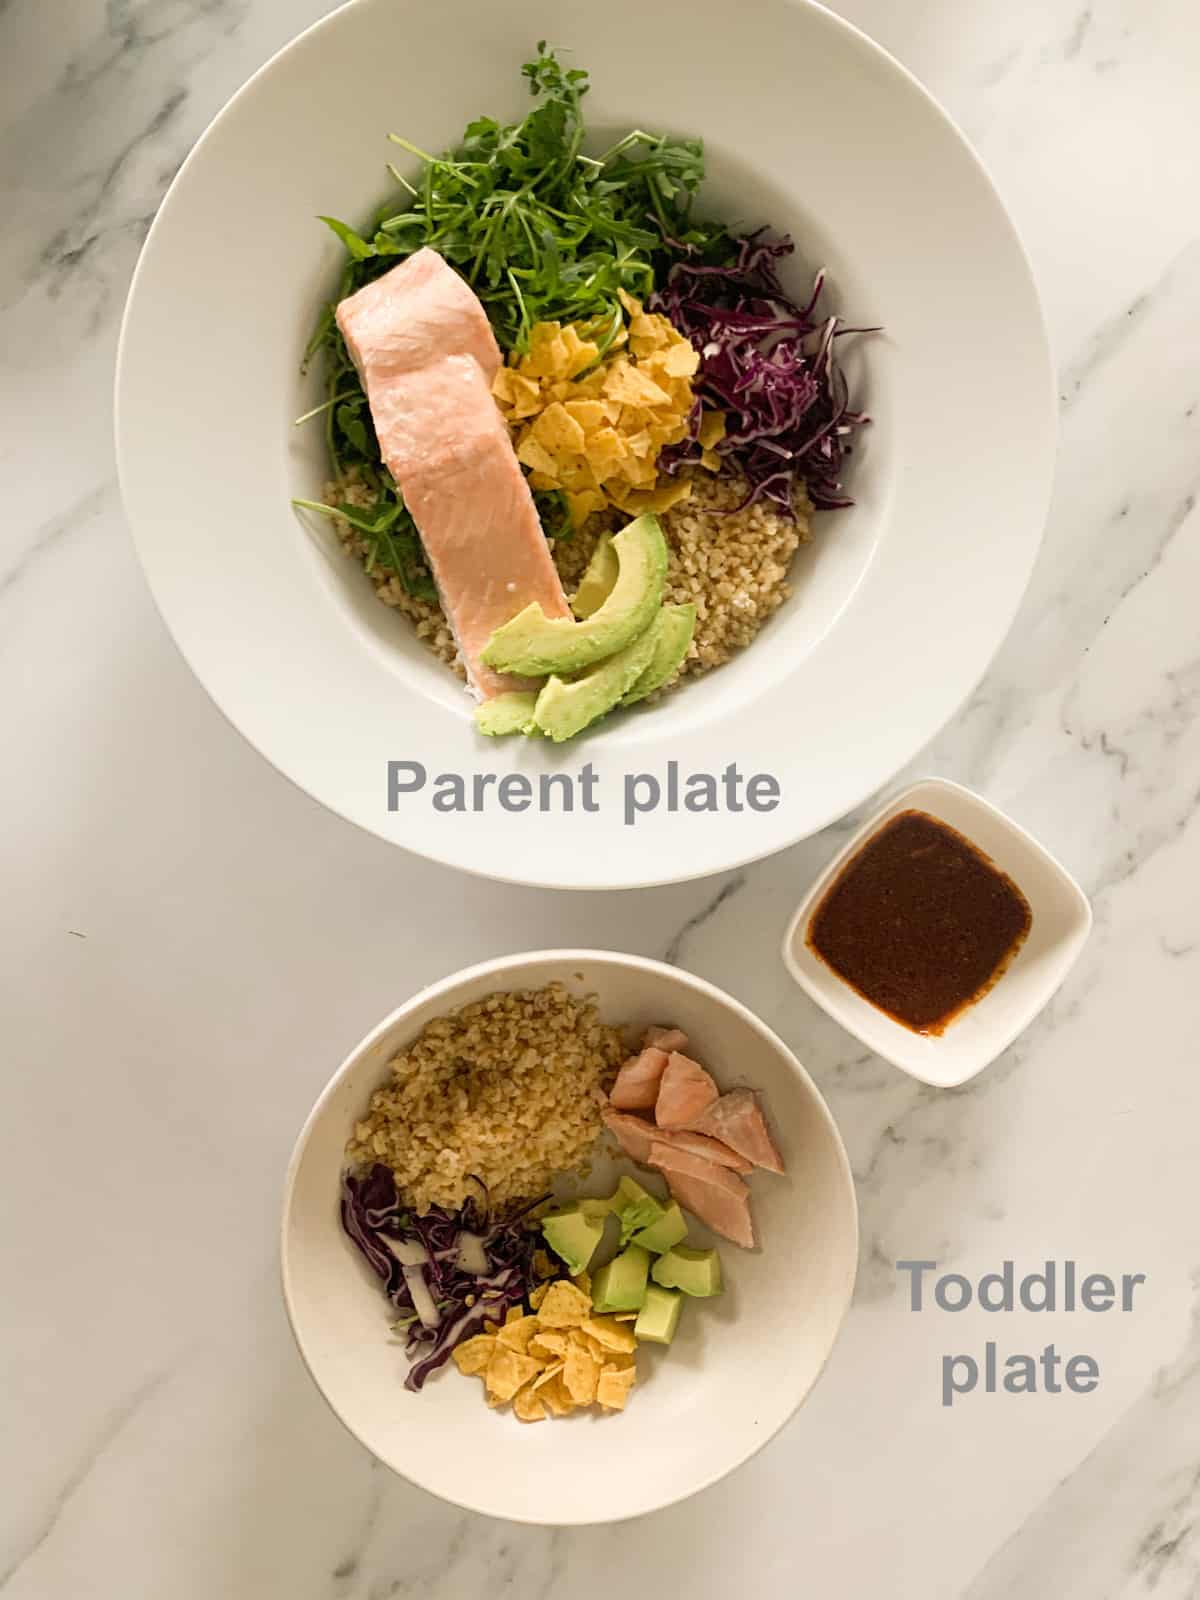 photo of parent plate and dressing on the side and a toddler plate